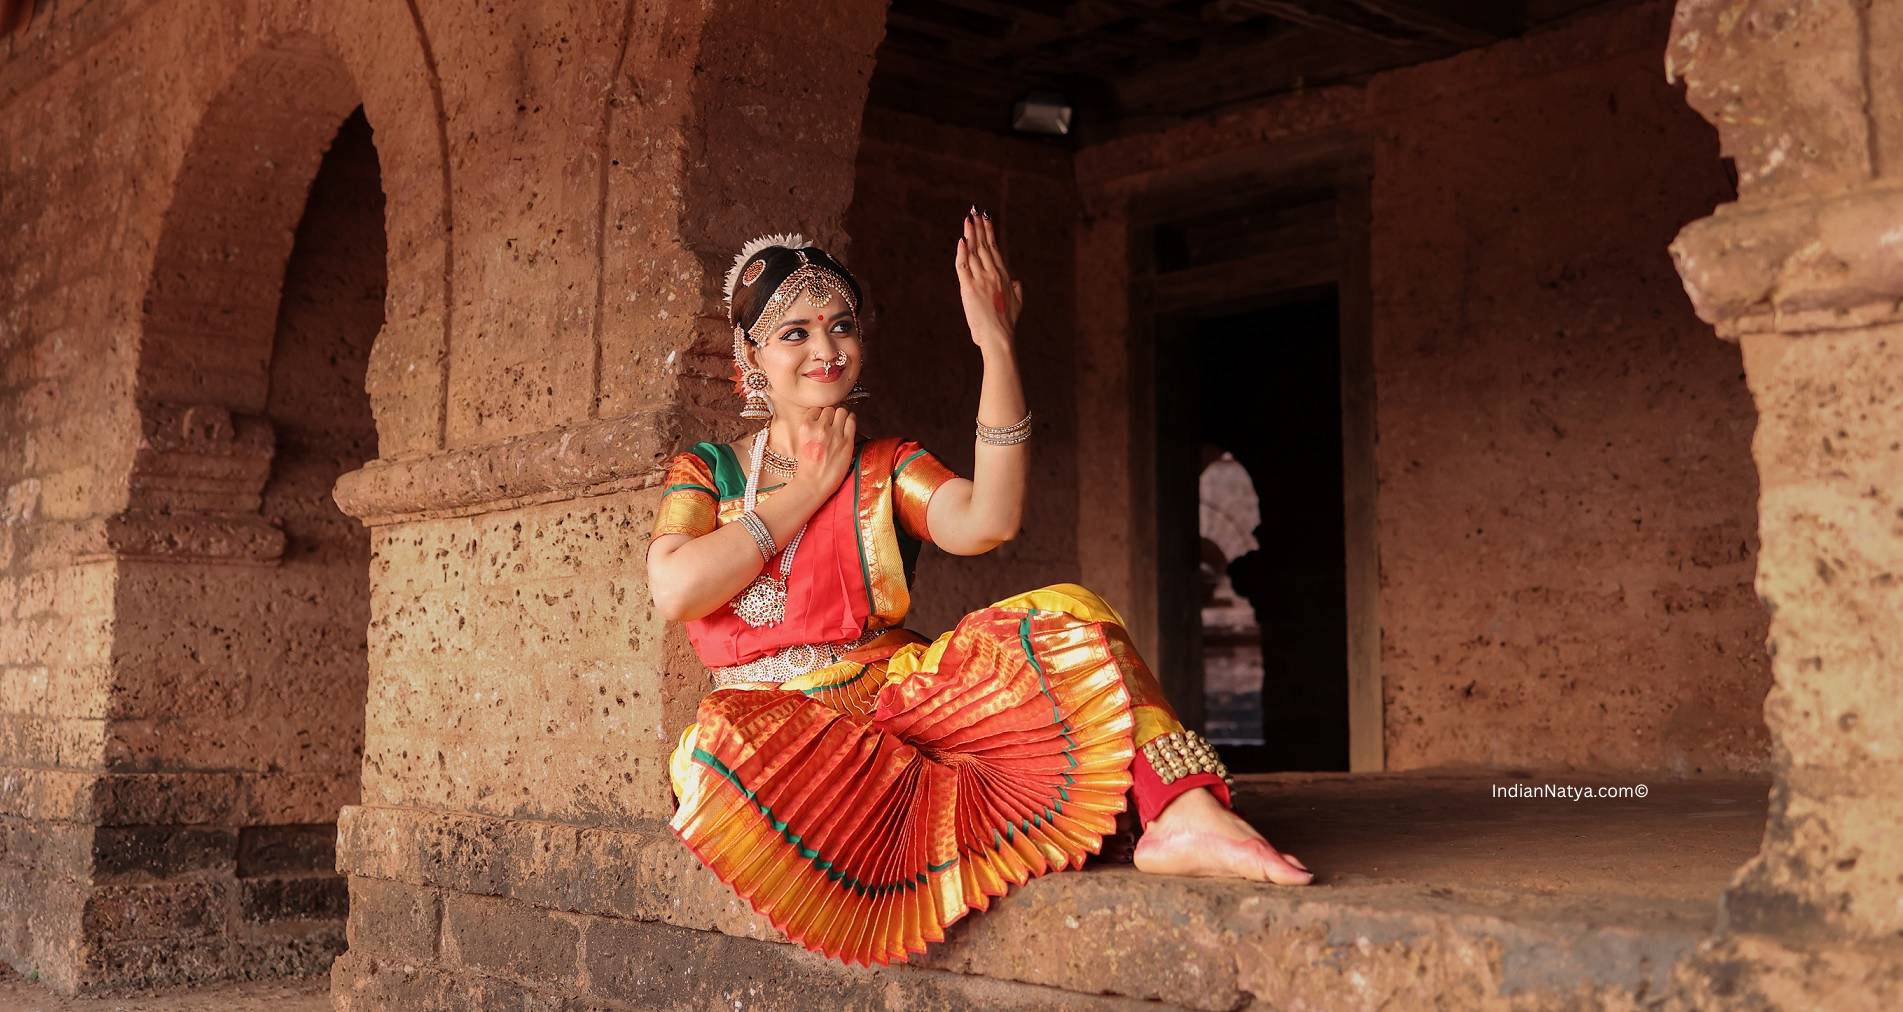 II Indian Classical Dance pose II I took my cousin's photo as a reference  image.. She is an amazing Indian classical dancer. (specially ... |  Instagram